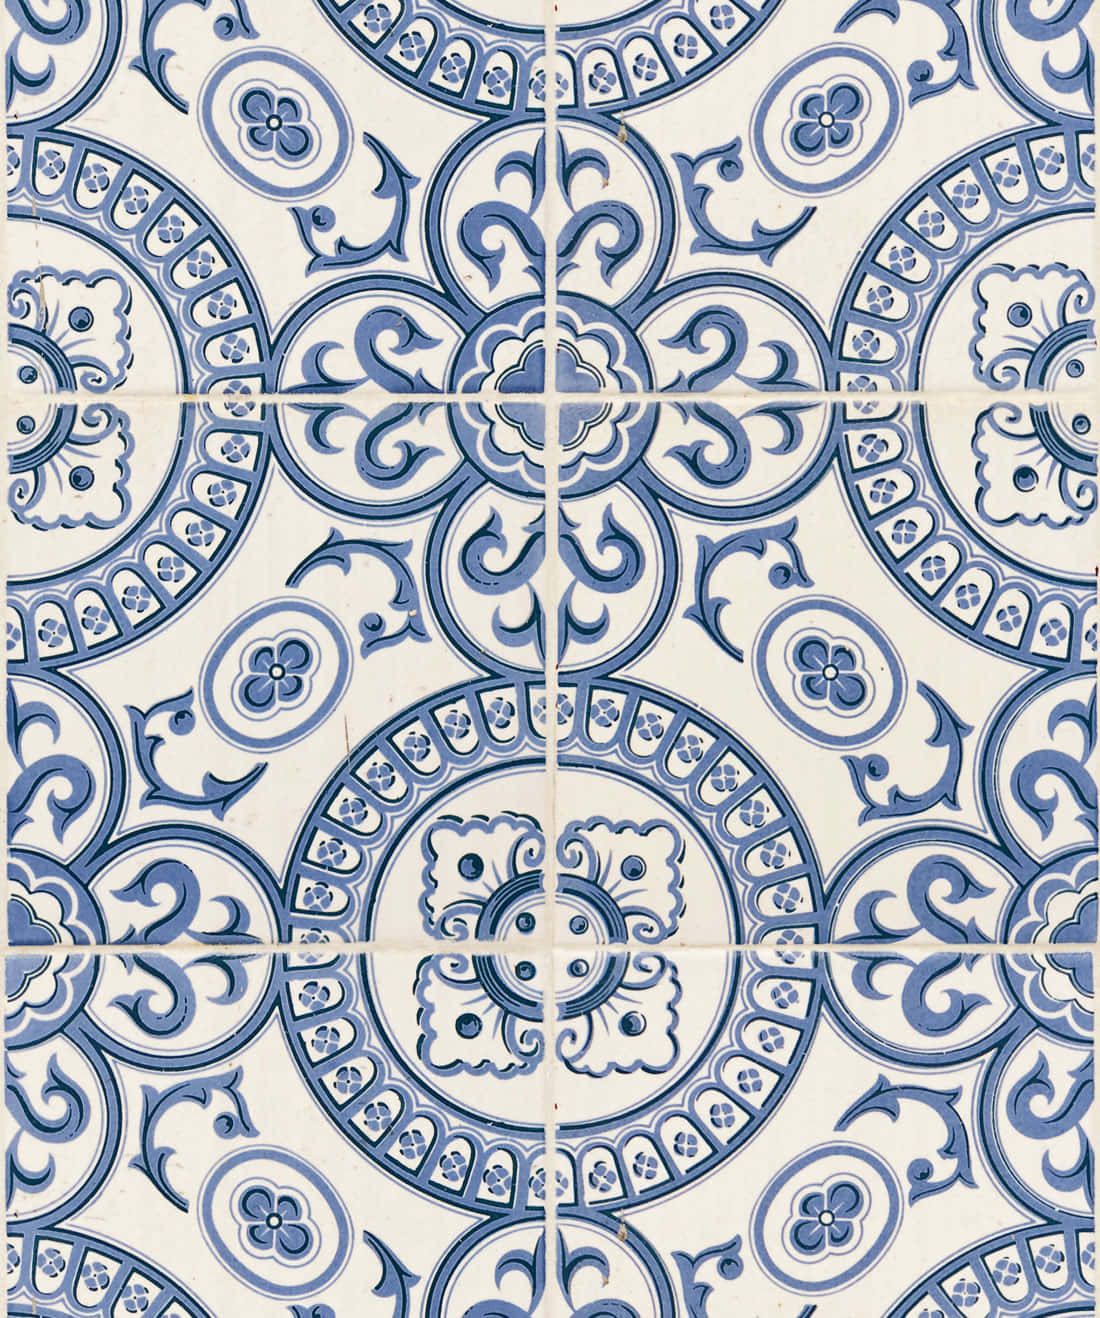 A Blue And White Tile With A Circular Design Background